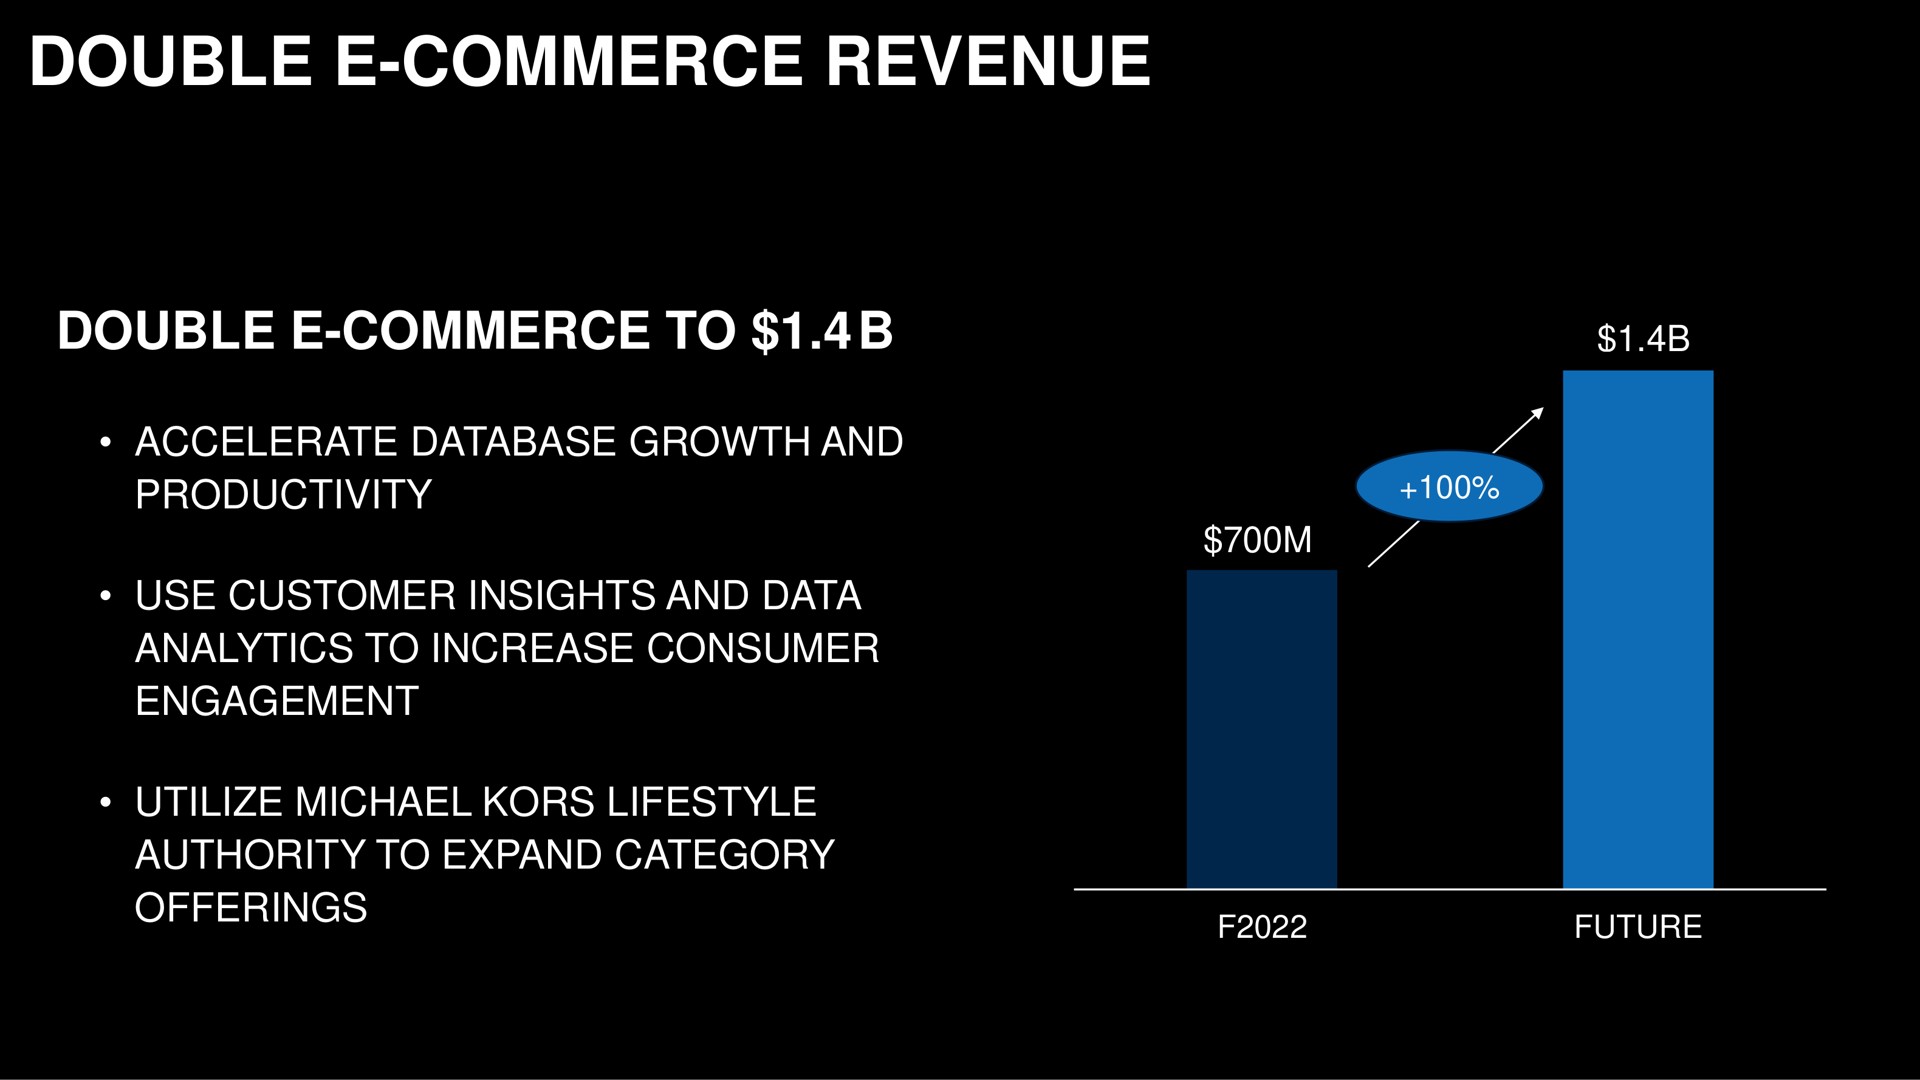 double commerce revenue to accelerate growth and productivity use customer insights and data analytics to increase consumer engagement utilize kors authority to expand category offerings future | Capri Holdings